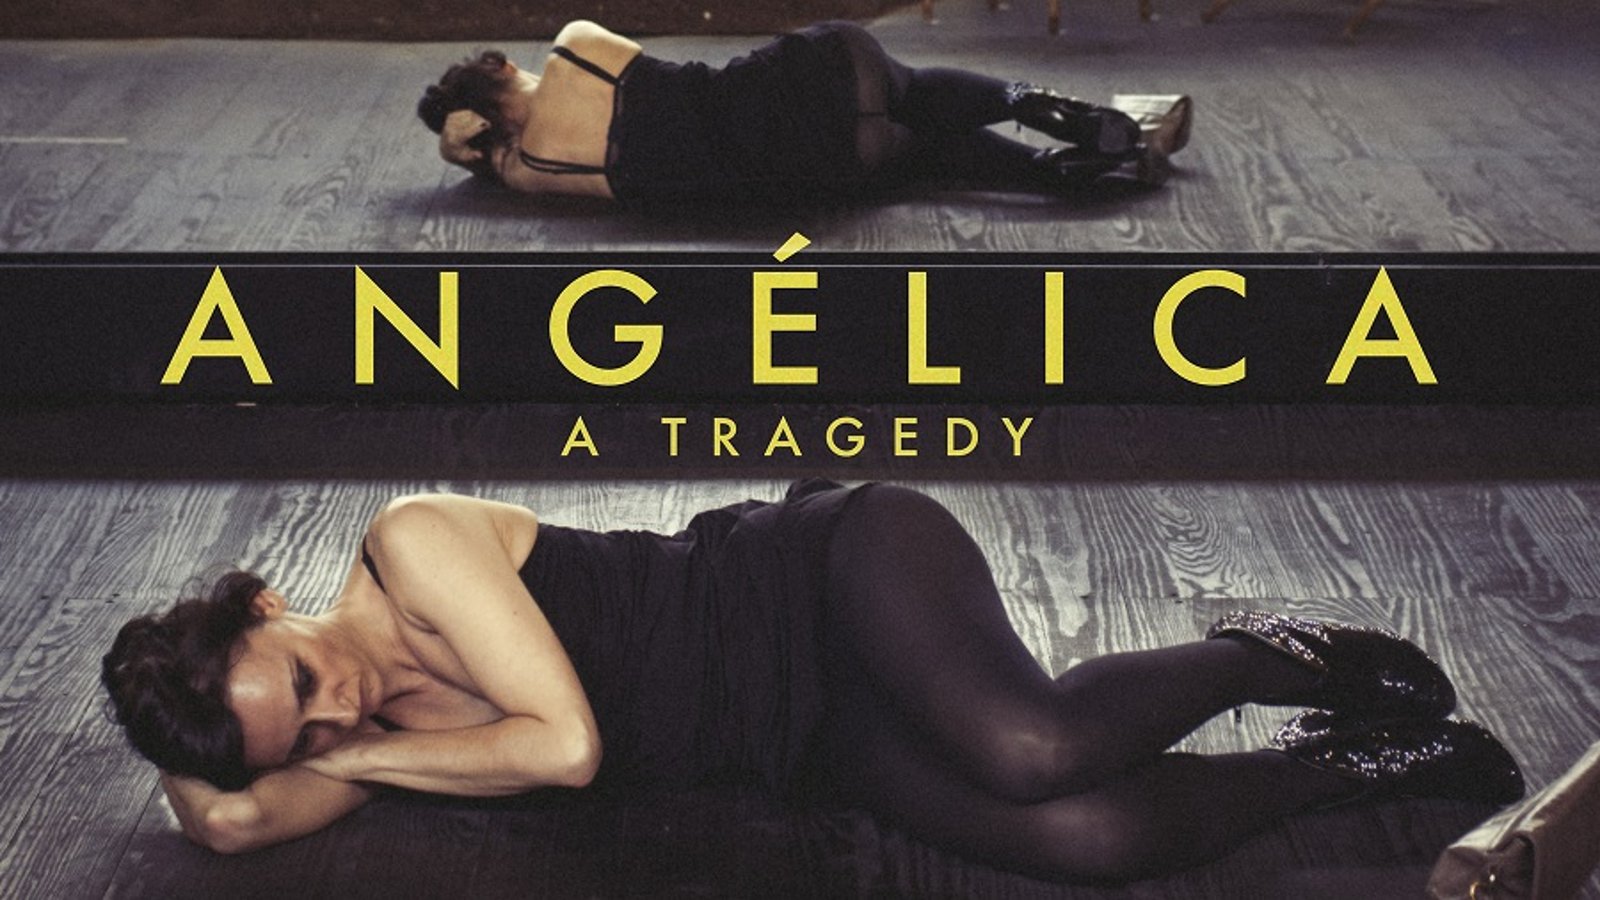 Angelica [A Tragedy] - An Insightful Look Into the Process of a Performance Artist